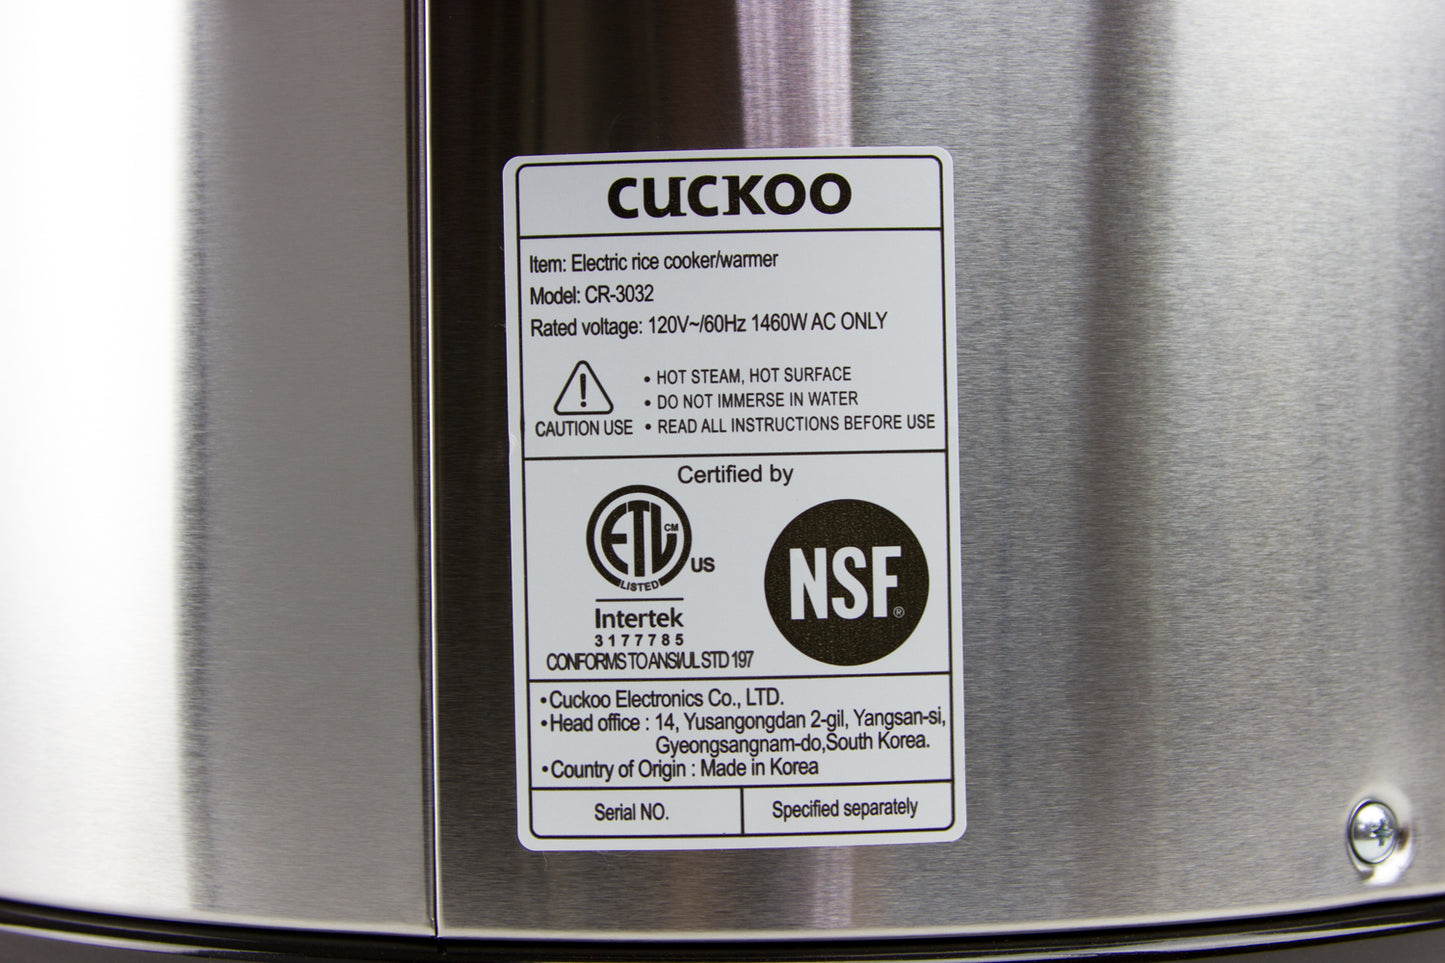 Cuckoo Commercial Electric Warmer Rice Cooker (CR-3032) 30 Cups – KEY  Company